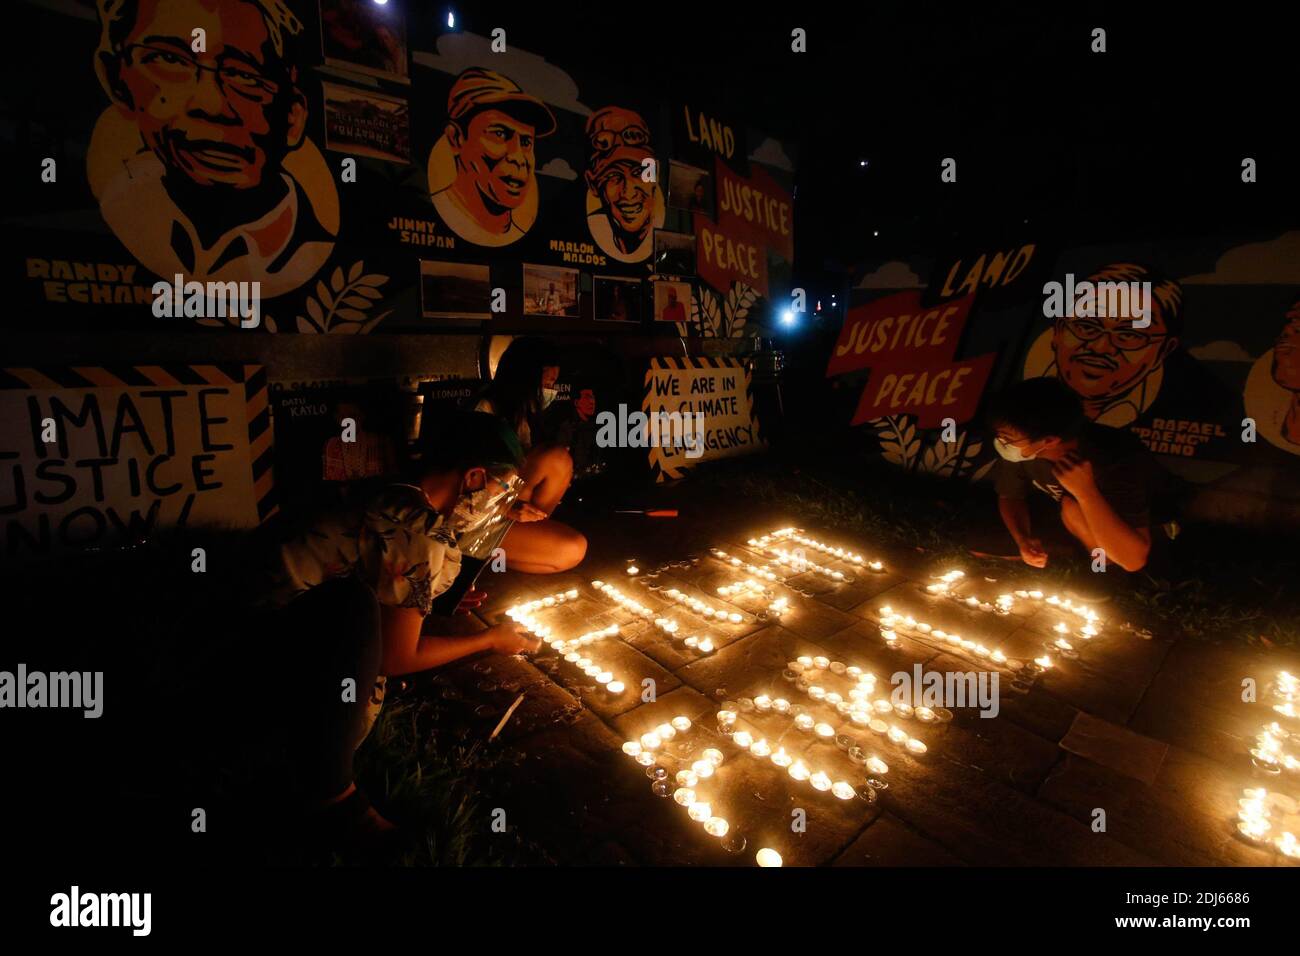 Climate activists lit candles and held LED lighting banners on December 11th 2020. This activity commemorates the five year anniversary of the Paris Agreement with a call to fight for 1.5 and to end the killing of environmental defenders. Quezon City, Philippines. Stock Photo